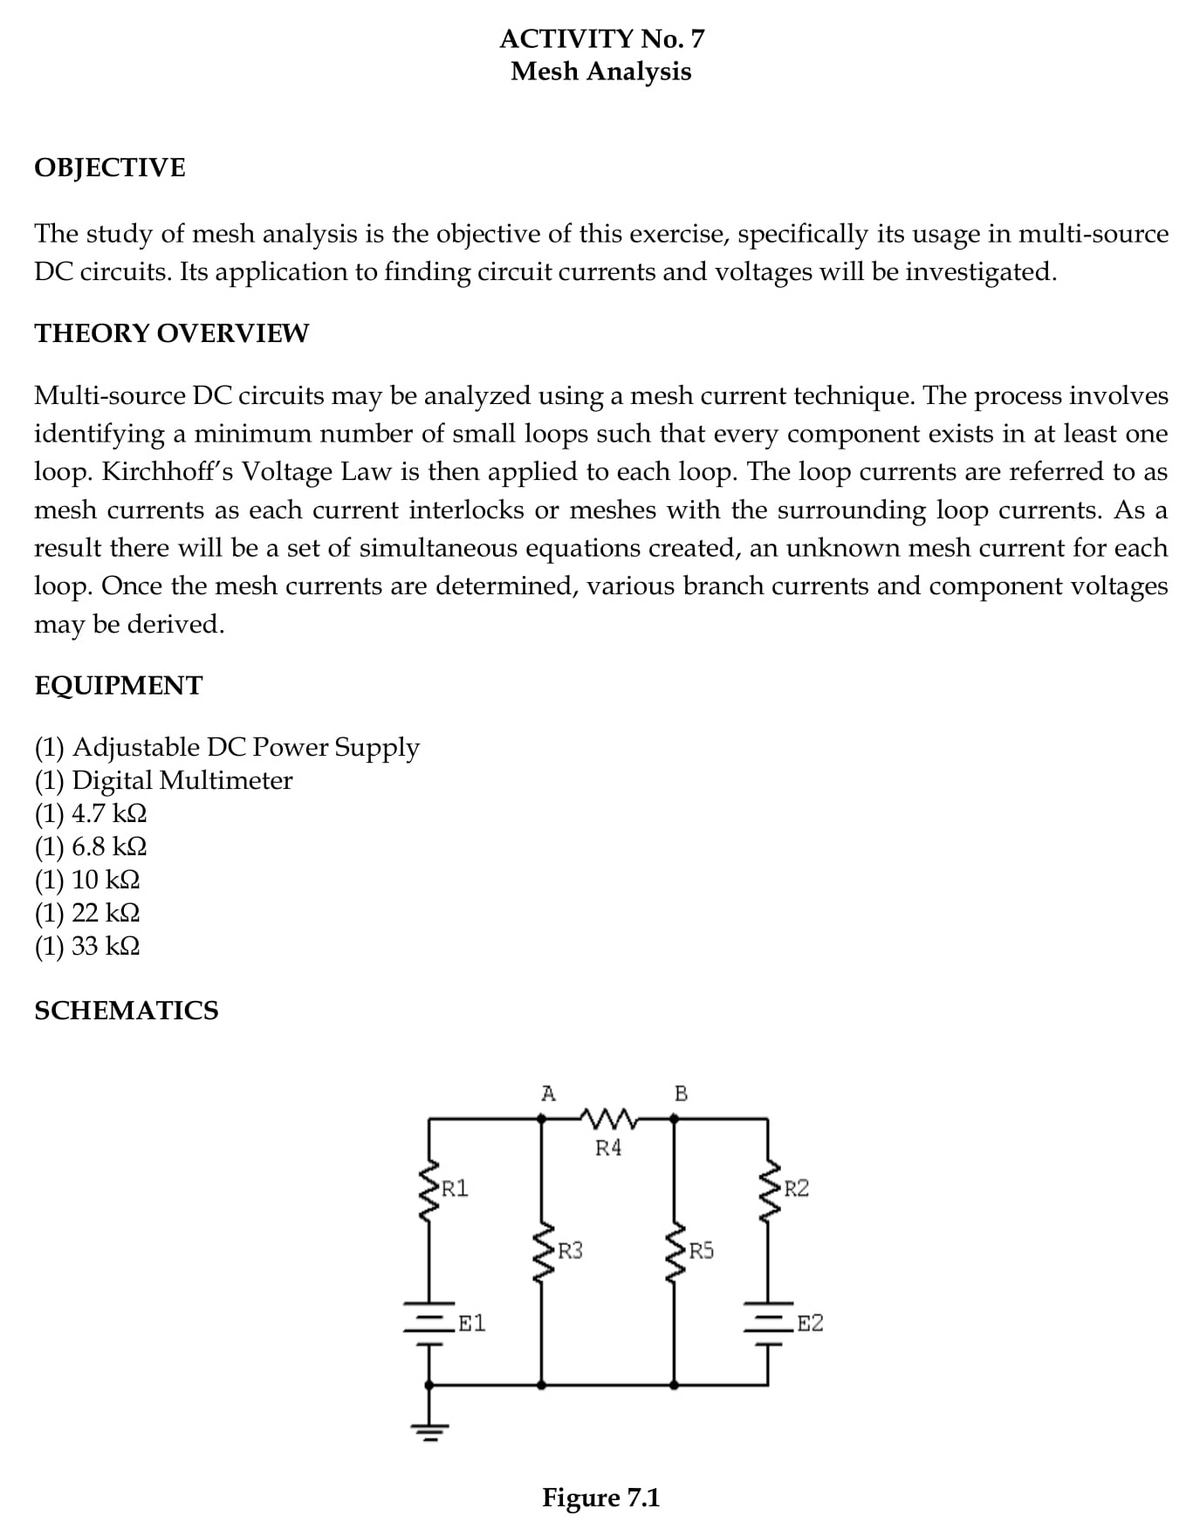 ACTIVITY No. 7
Mesh Analysis
ОВJЕСTIVE
The study of mesh analysis is the objective of this exercise, specifically its usage in multi-source
DC circuits. Its application to finding circuit currents and voltages will be investigated.
THEORY OVERVIEW
Multi-source DC circuits may be analyzed using a mesh current technique. The process involves
identifying a minimum number of small loops such that every component exists in at least one
loop. Kirchhoff's Voltage Law is then applied to each loop. The loop currents are referred to as
mesh currents as each current interlocks or meshes with the surrounding loop currents. As a
result there will be a set of simultaneous equations created, an unknown mesh current for each
loop. Once the mesh currents are determined, various branch currents and component voltages
may be derived.
EQUIPMΕNT
(1) Adjustable DC Power Supply
(1) Digital Multimeter
(1) 4.7 k2
(1) 6.8 k2
(1) 10 k2
(1) 22 kQ
(1) 33 k2
SCHEMATICS
A
B
R4
R1
R2
R3
E1
E2
Figure 7.1
